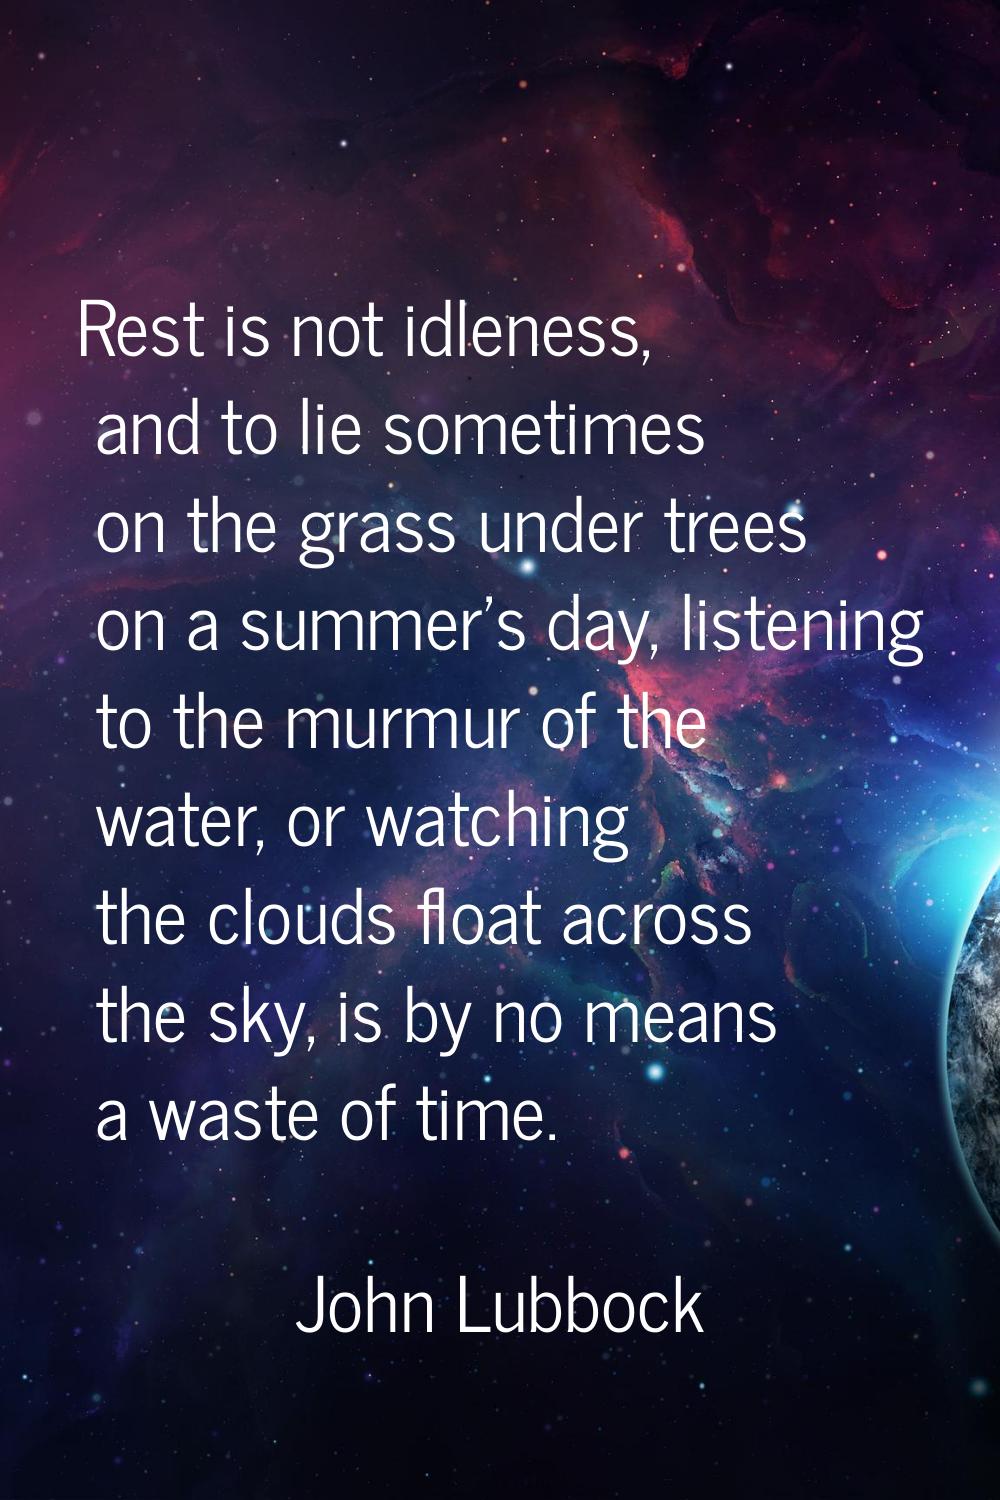 Rest is not idleness, and to lie sometimes on the grass under trees on a summer's day, listening to